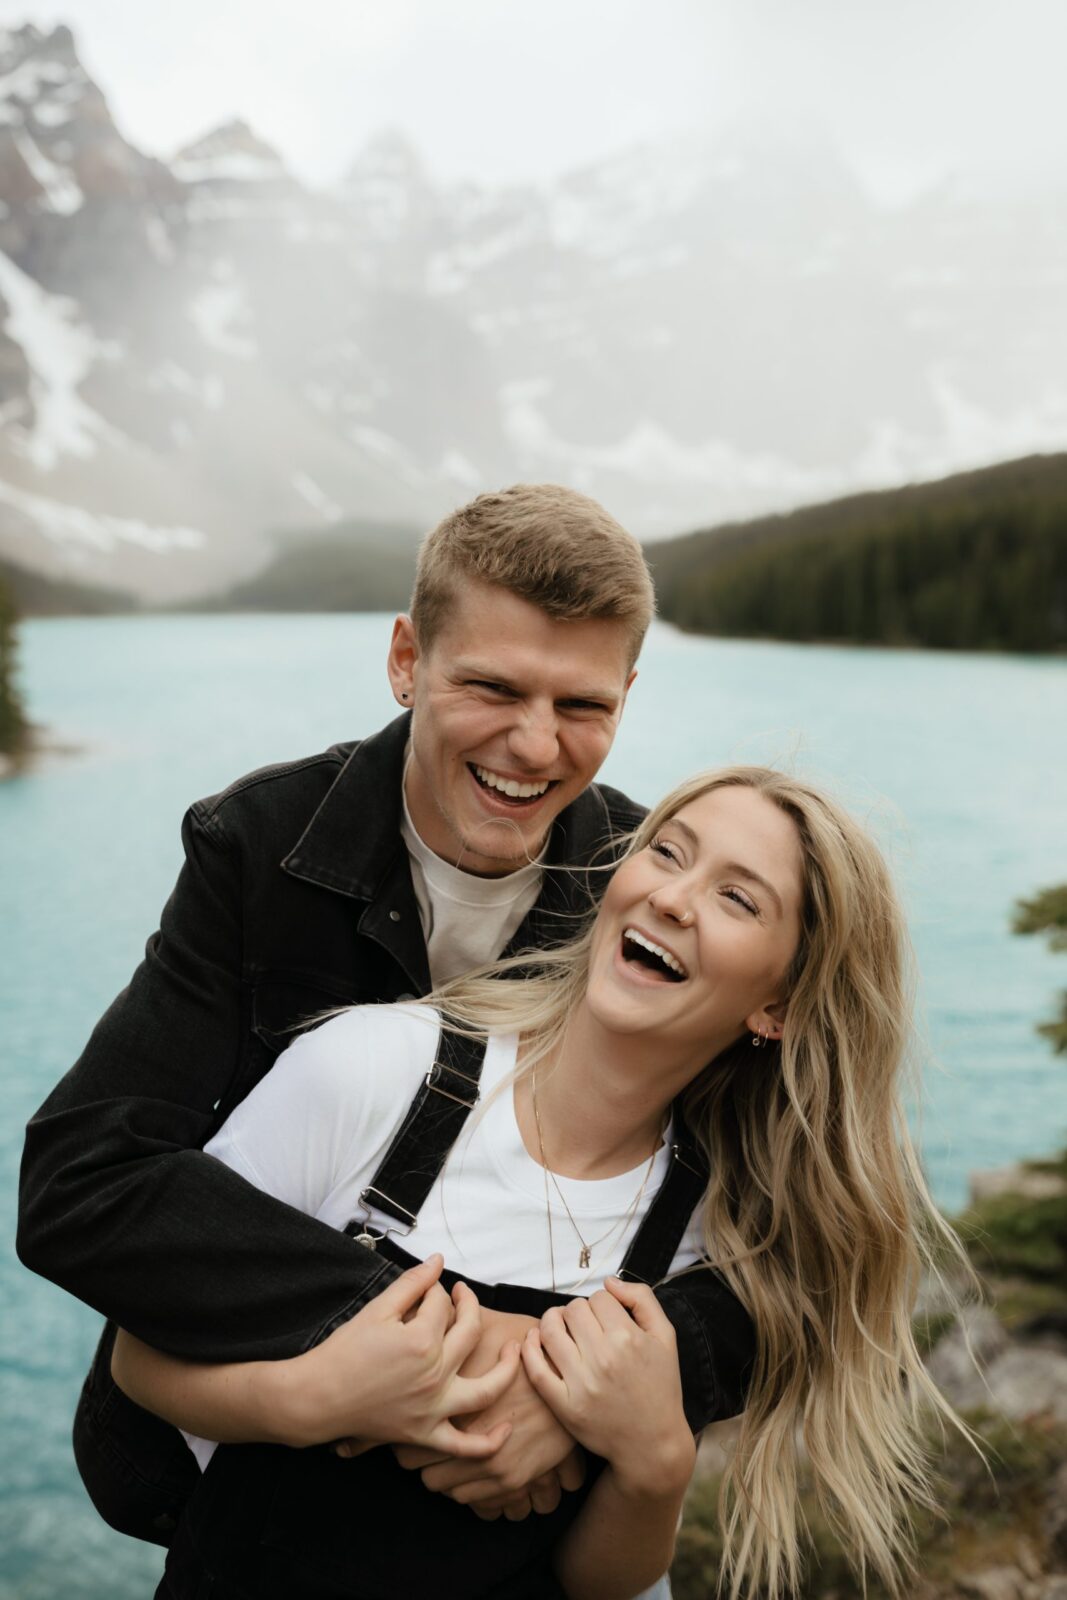 6 Tips All About Choosing Outfits For Your Engagement Session - Malorie Reiter featured on Bronte Bride